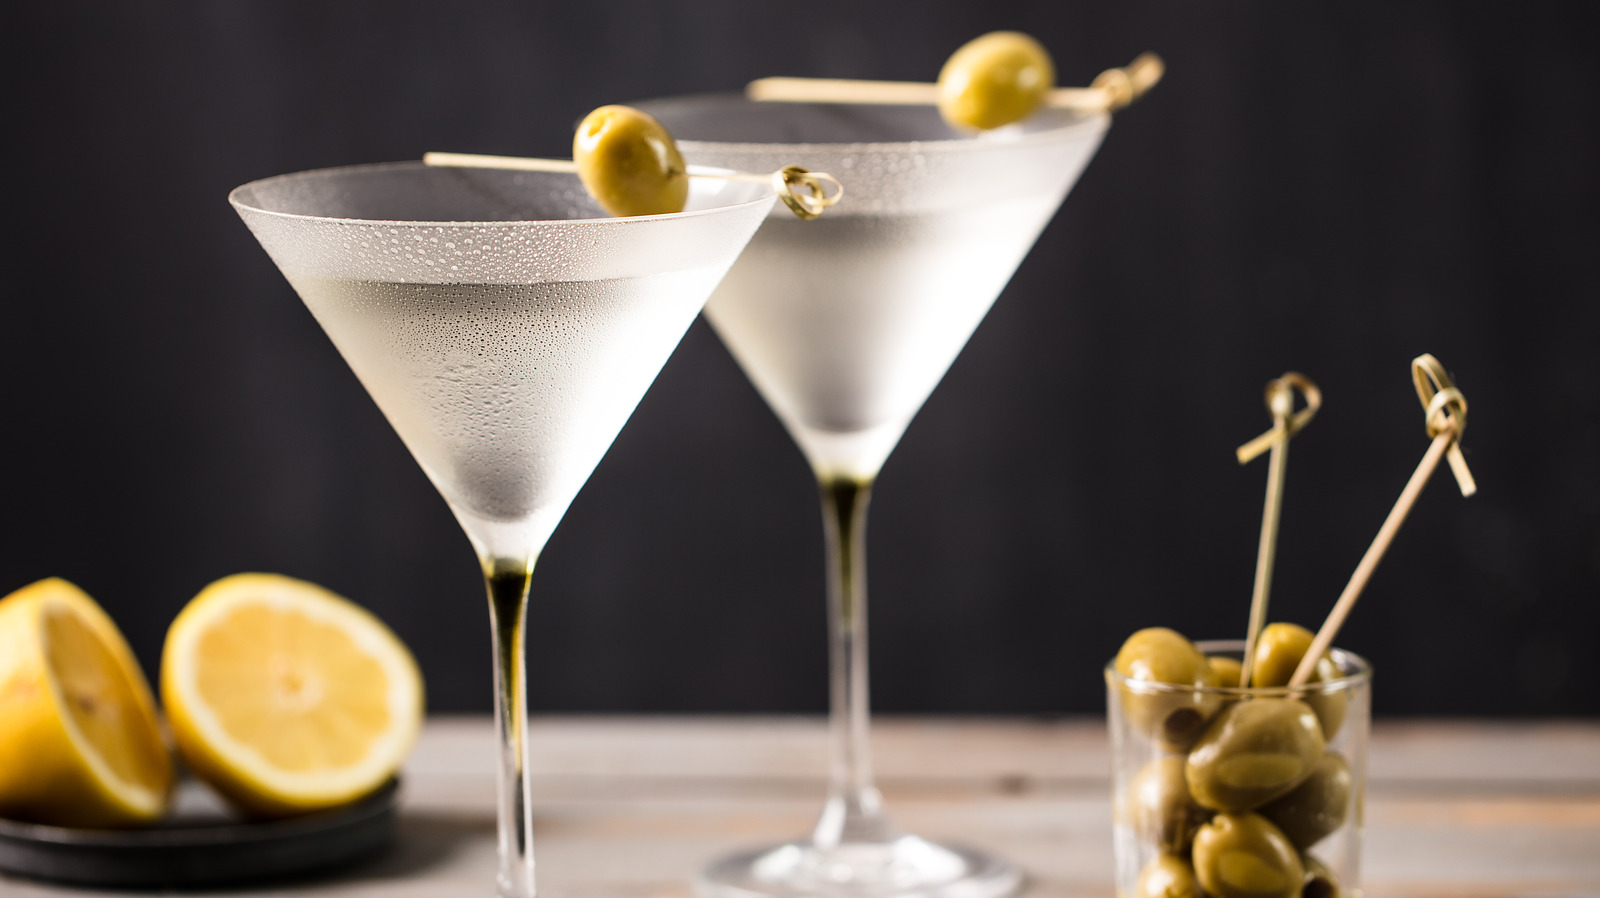 https://www.thedailymeal.com/img/gallery/elevate-your-martini-in-a-major-way-with-olive-ice-cubes/l-intro-1702590492.jpg